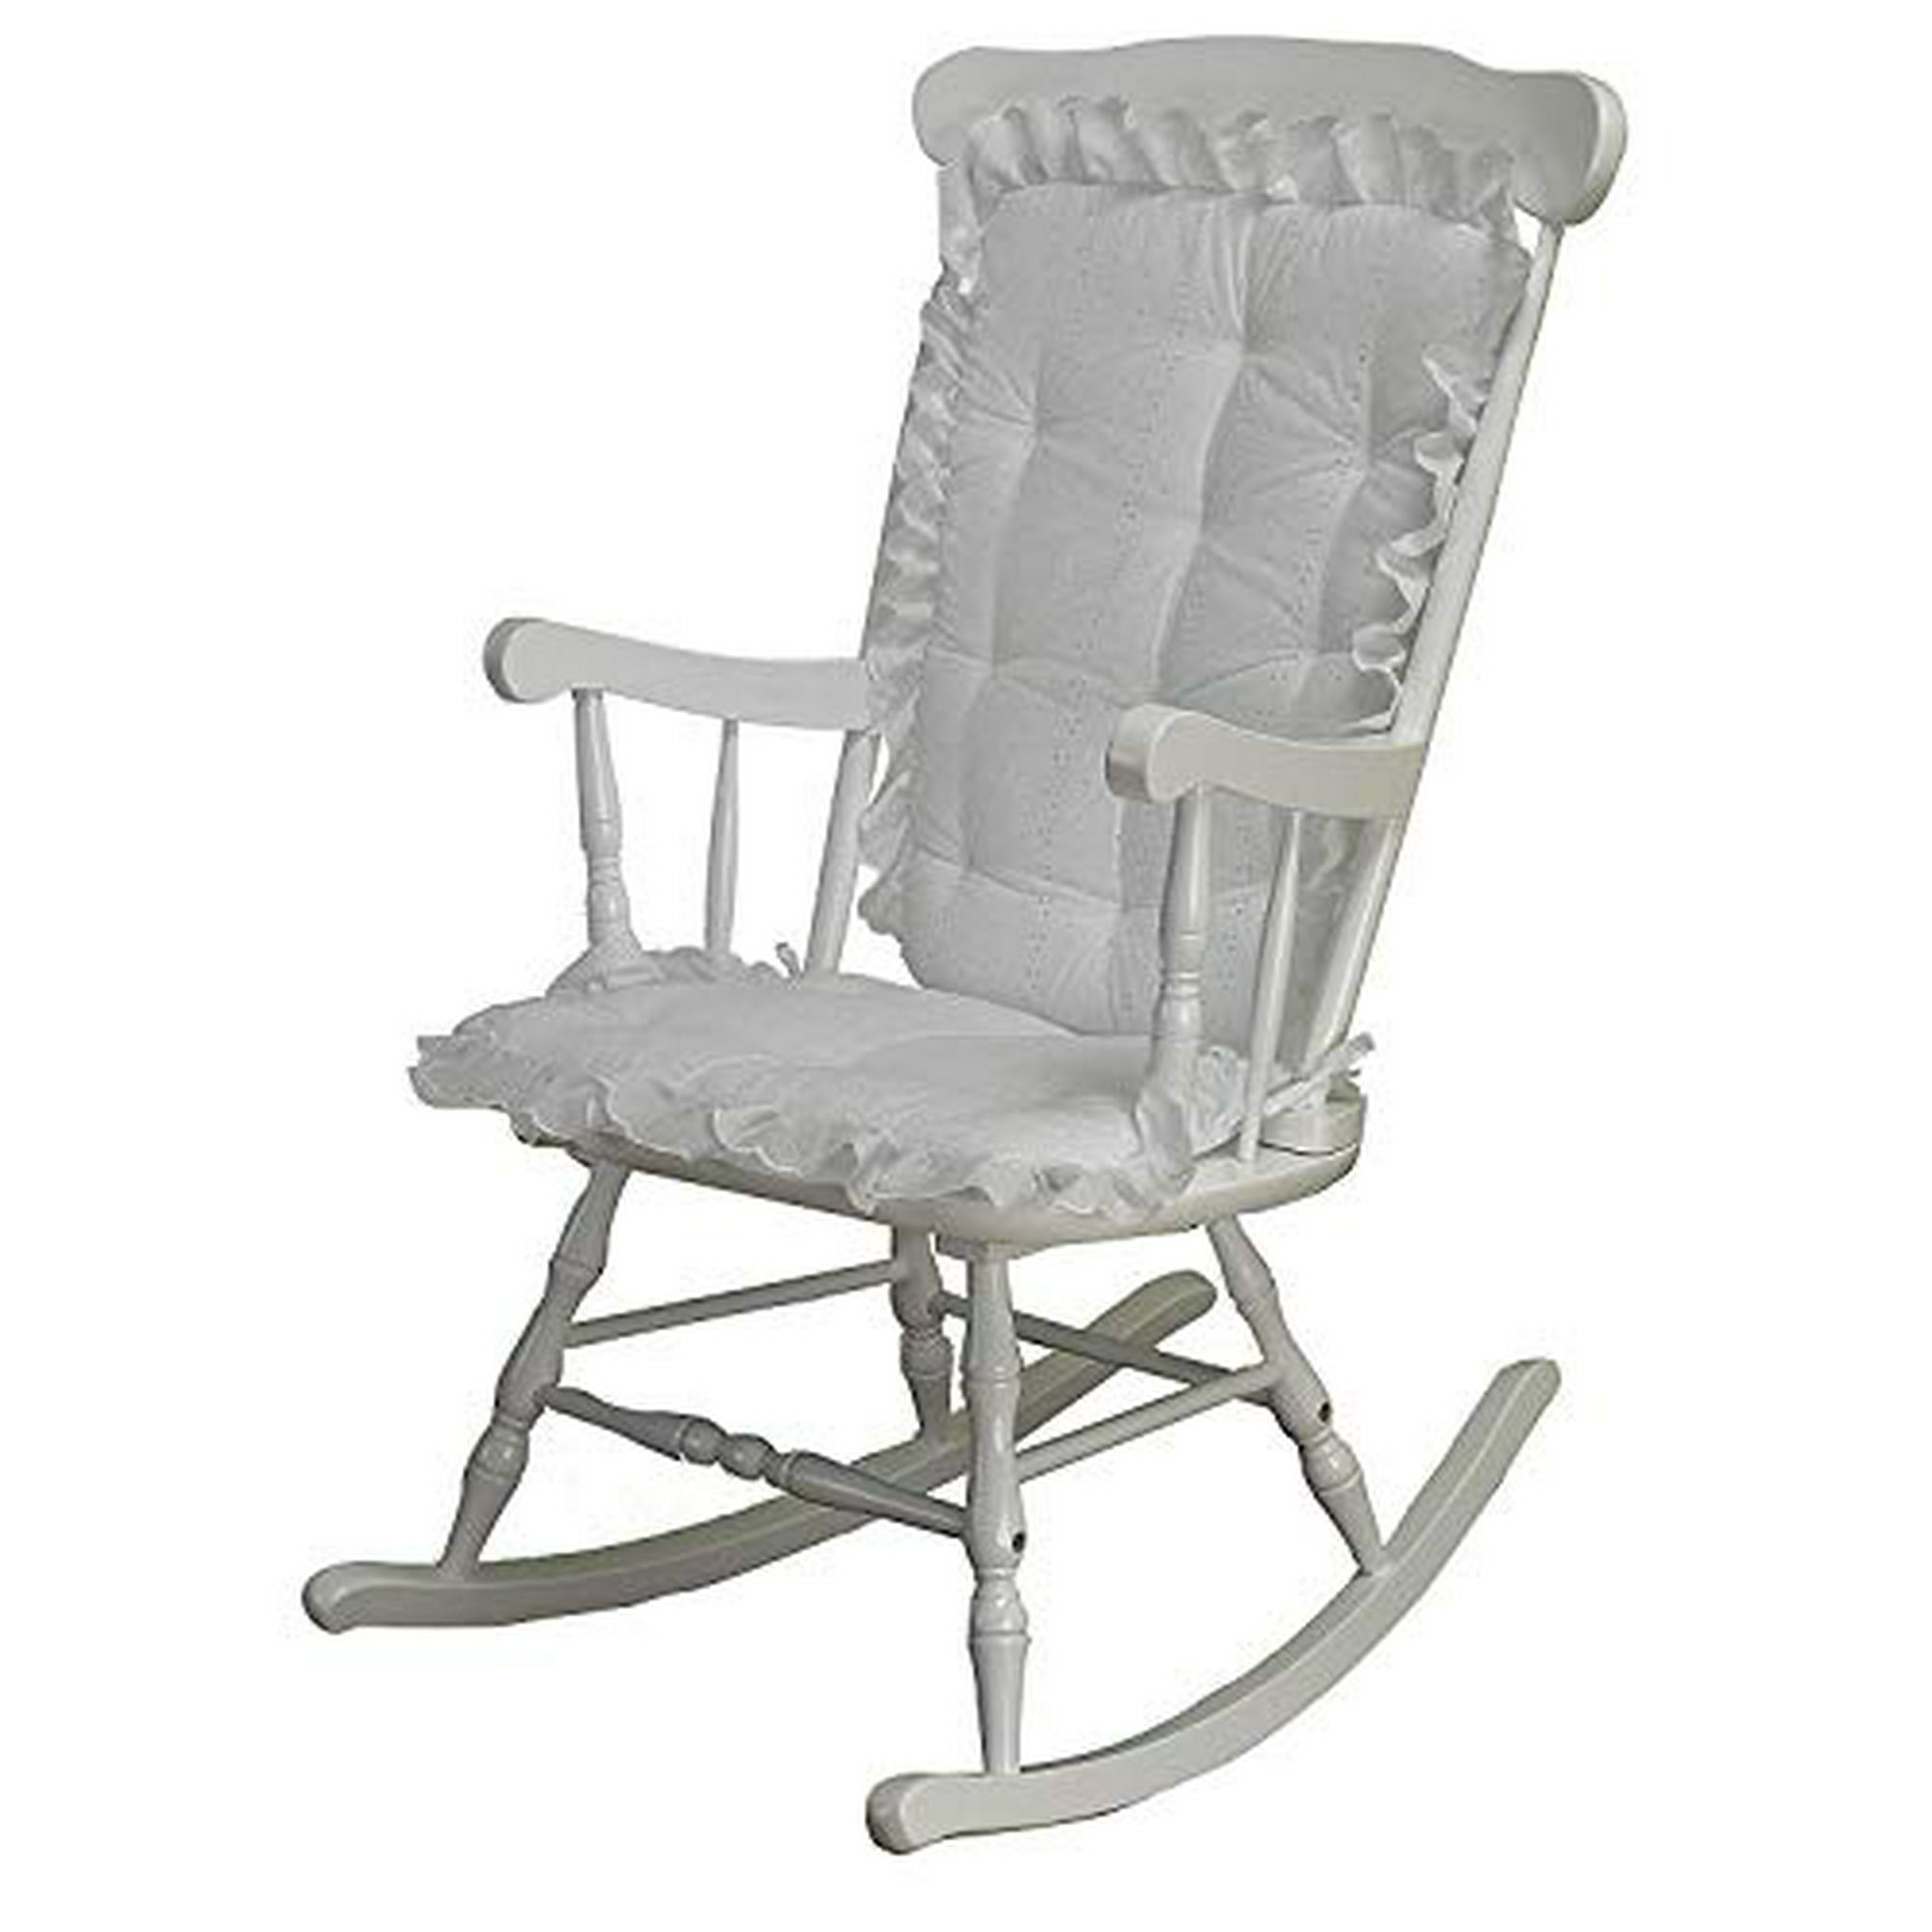 Rocking Chair Cushion Pad Set White Eyelet Machine Washable Seat Cover Or Replacement Pads For Rocker Or Glider Walmart Canada